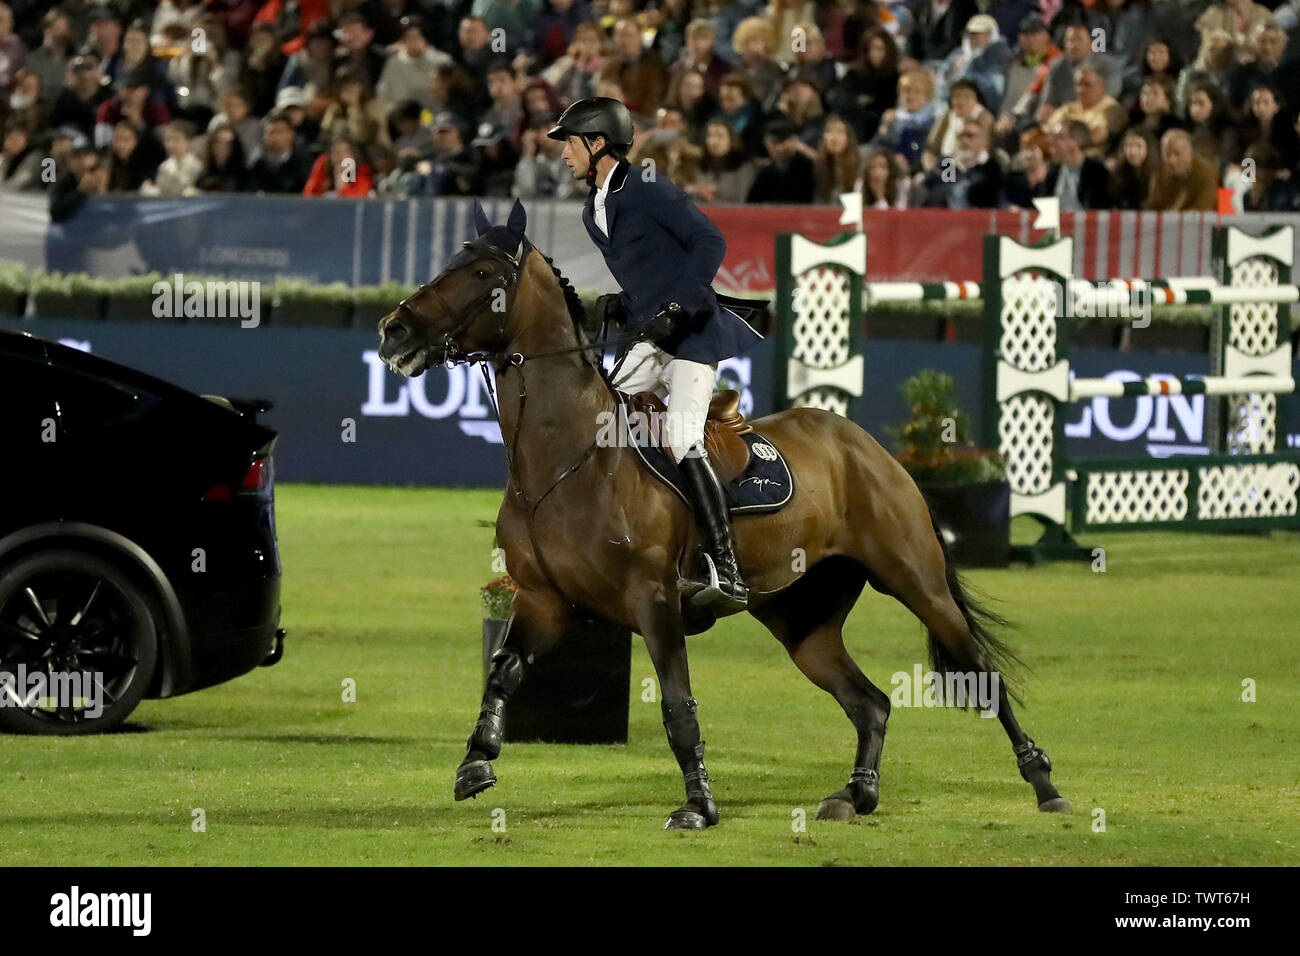 Cascais, Portugal. 22nd June, 2019. Martin Fuchs of Switzerland riding Chaplin during the Cascais Estoril jumping competition of Longines Global Champions Tour Grand Prix in Cascais, Portugal, on June 22, 2019. Credit: Petro Fiuza/Xinhua/Alamy Live News Stock Photo